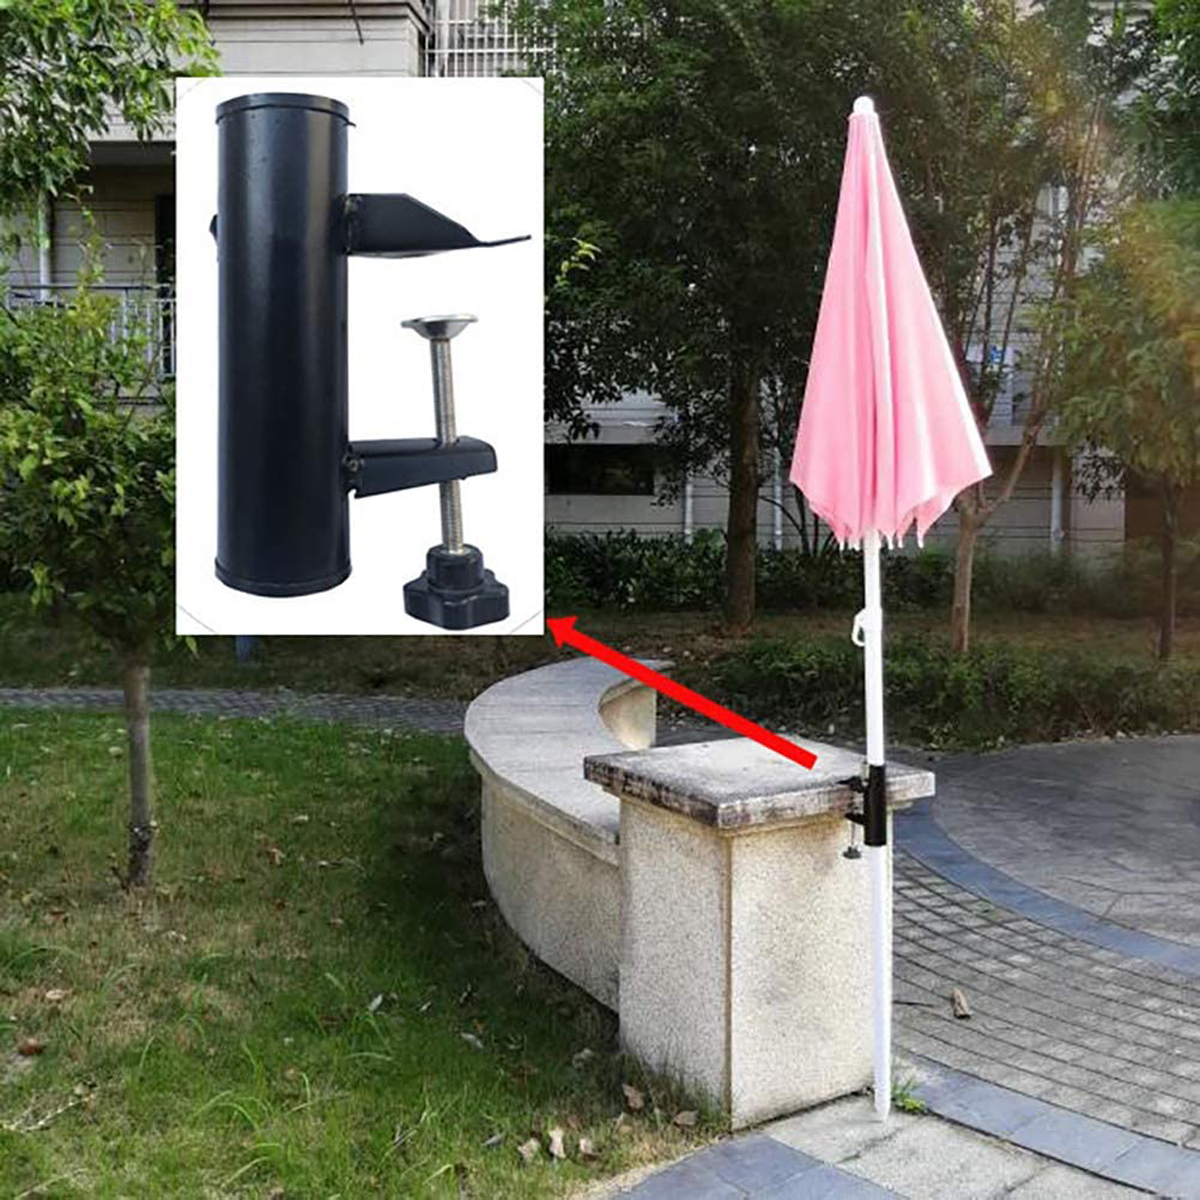 Patio Umbrella Stands Fixed Clip Black Portable Parasol Holder Table Mount Clamp for Outdoor Use Shade Accessories Garden Supply